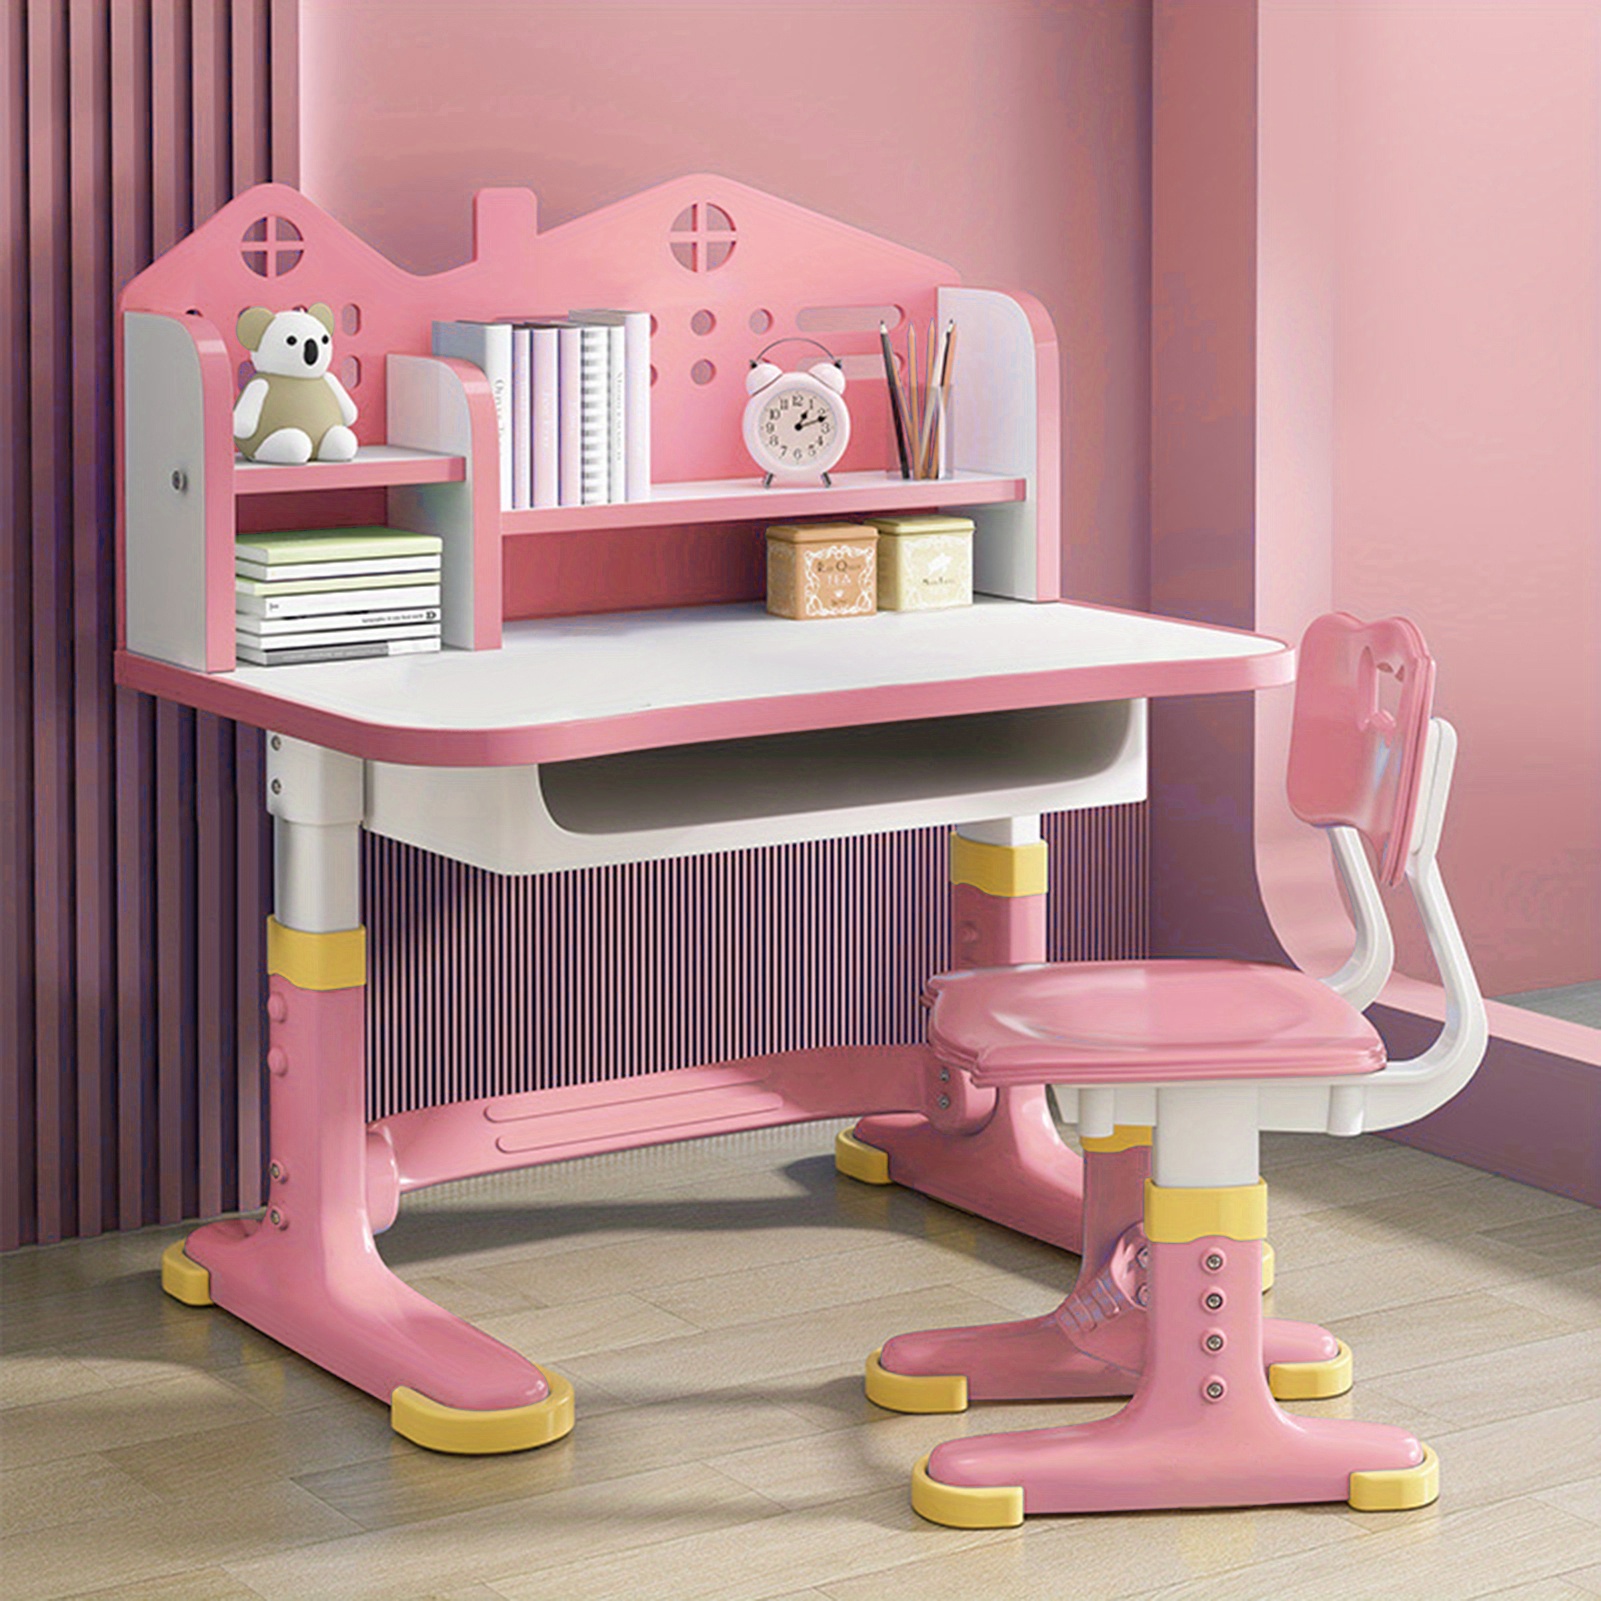 

Children's Functional Desk And Chair Set, Height Adjustable Children's School Study Desk With Castle Back, Extended Desktop, Bookshelf And Storage Drawers (pink) 41.37" X 29.75" X 24.63